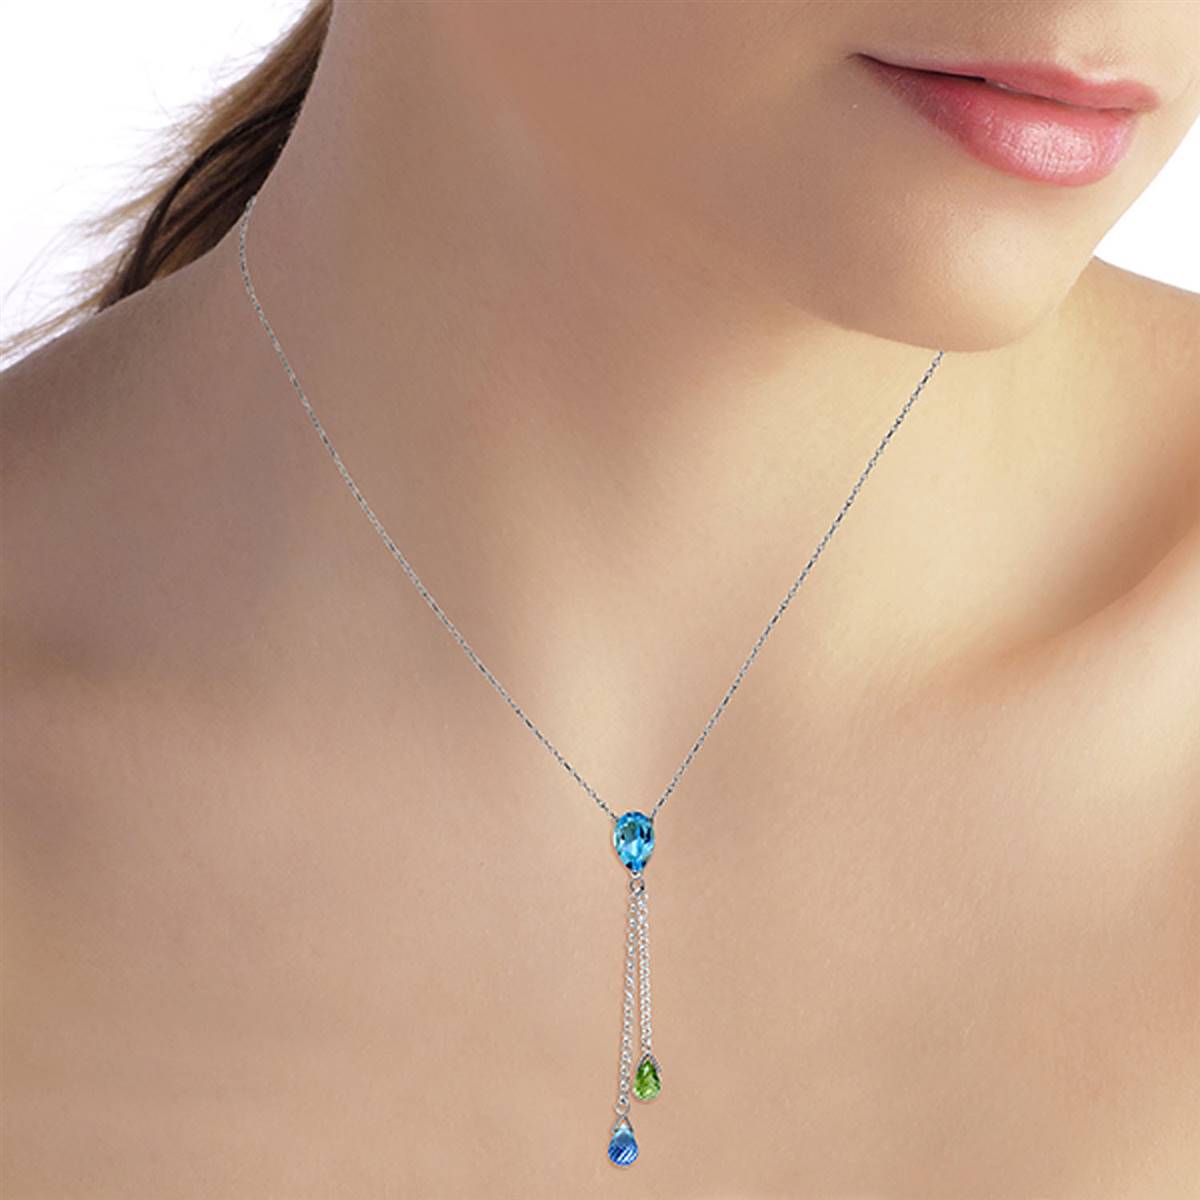 3.75 Carat 14K Solid White Gold Necklace Blue Topaz Peridot